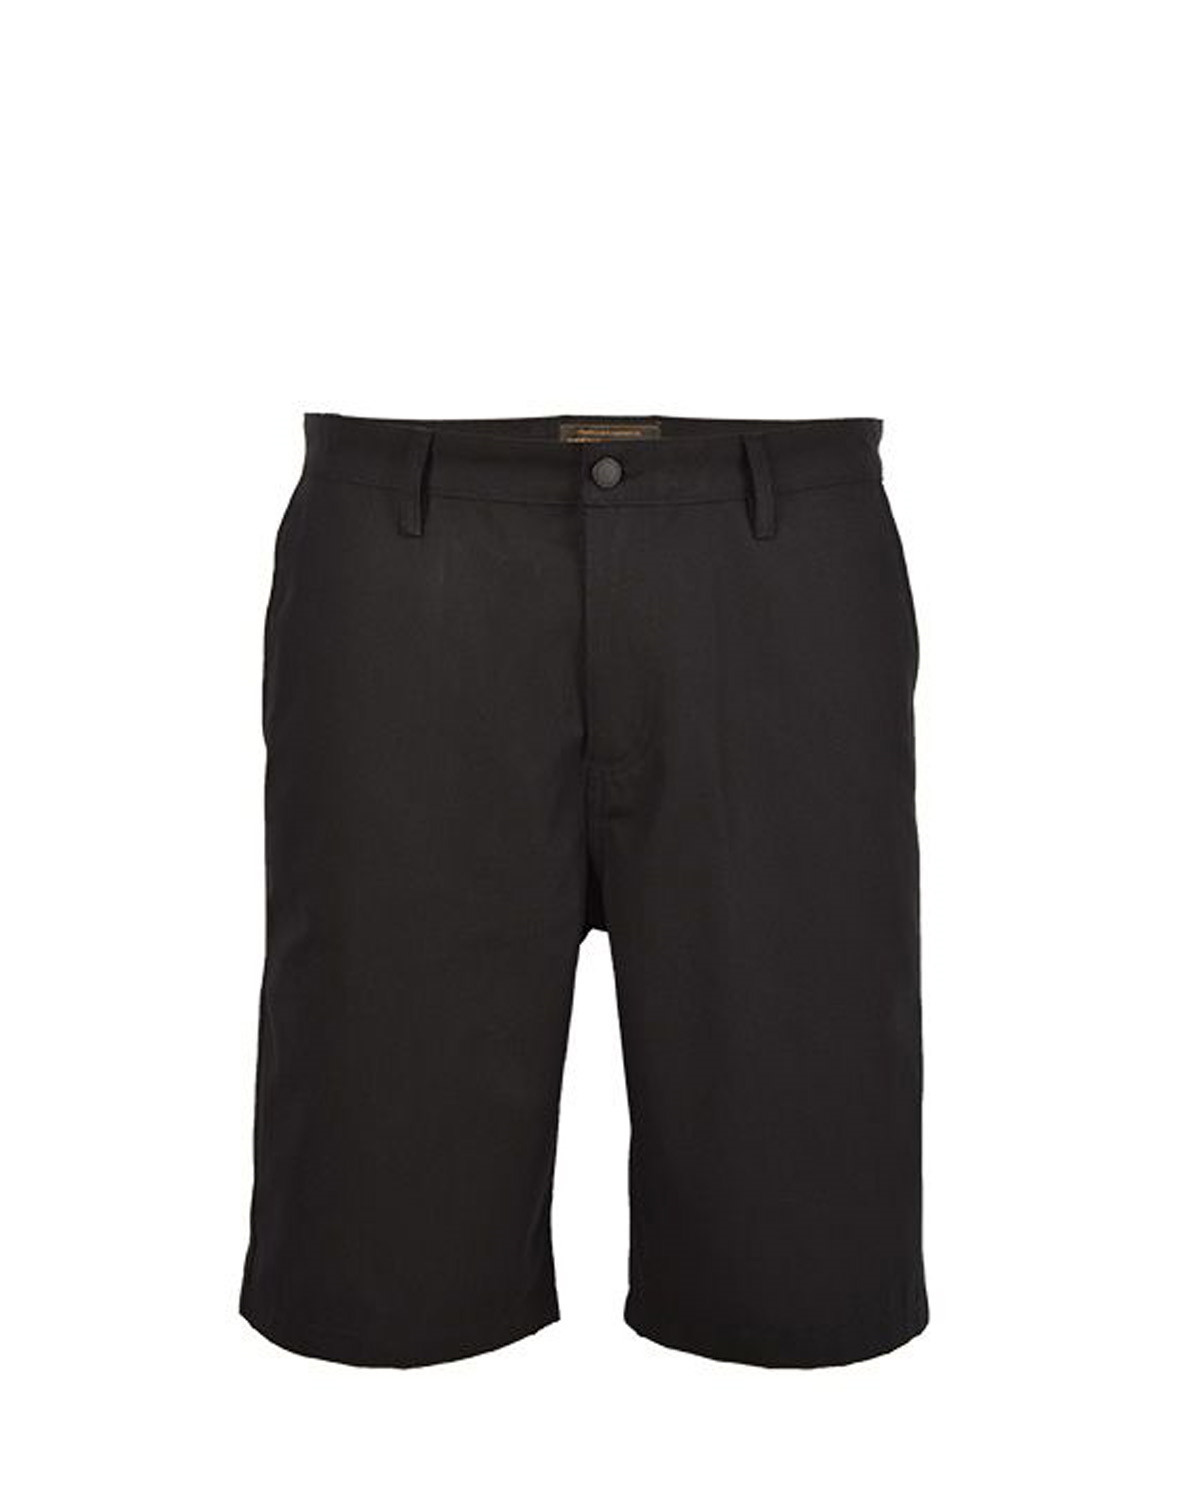 WRENCHMONKEES Simple Shorts (Sort, W30)